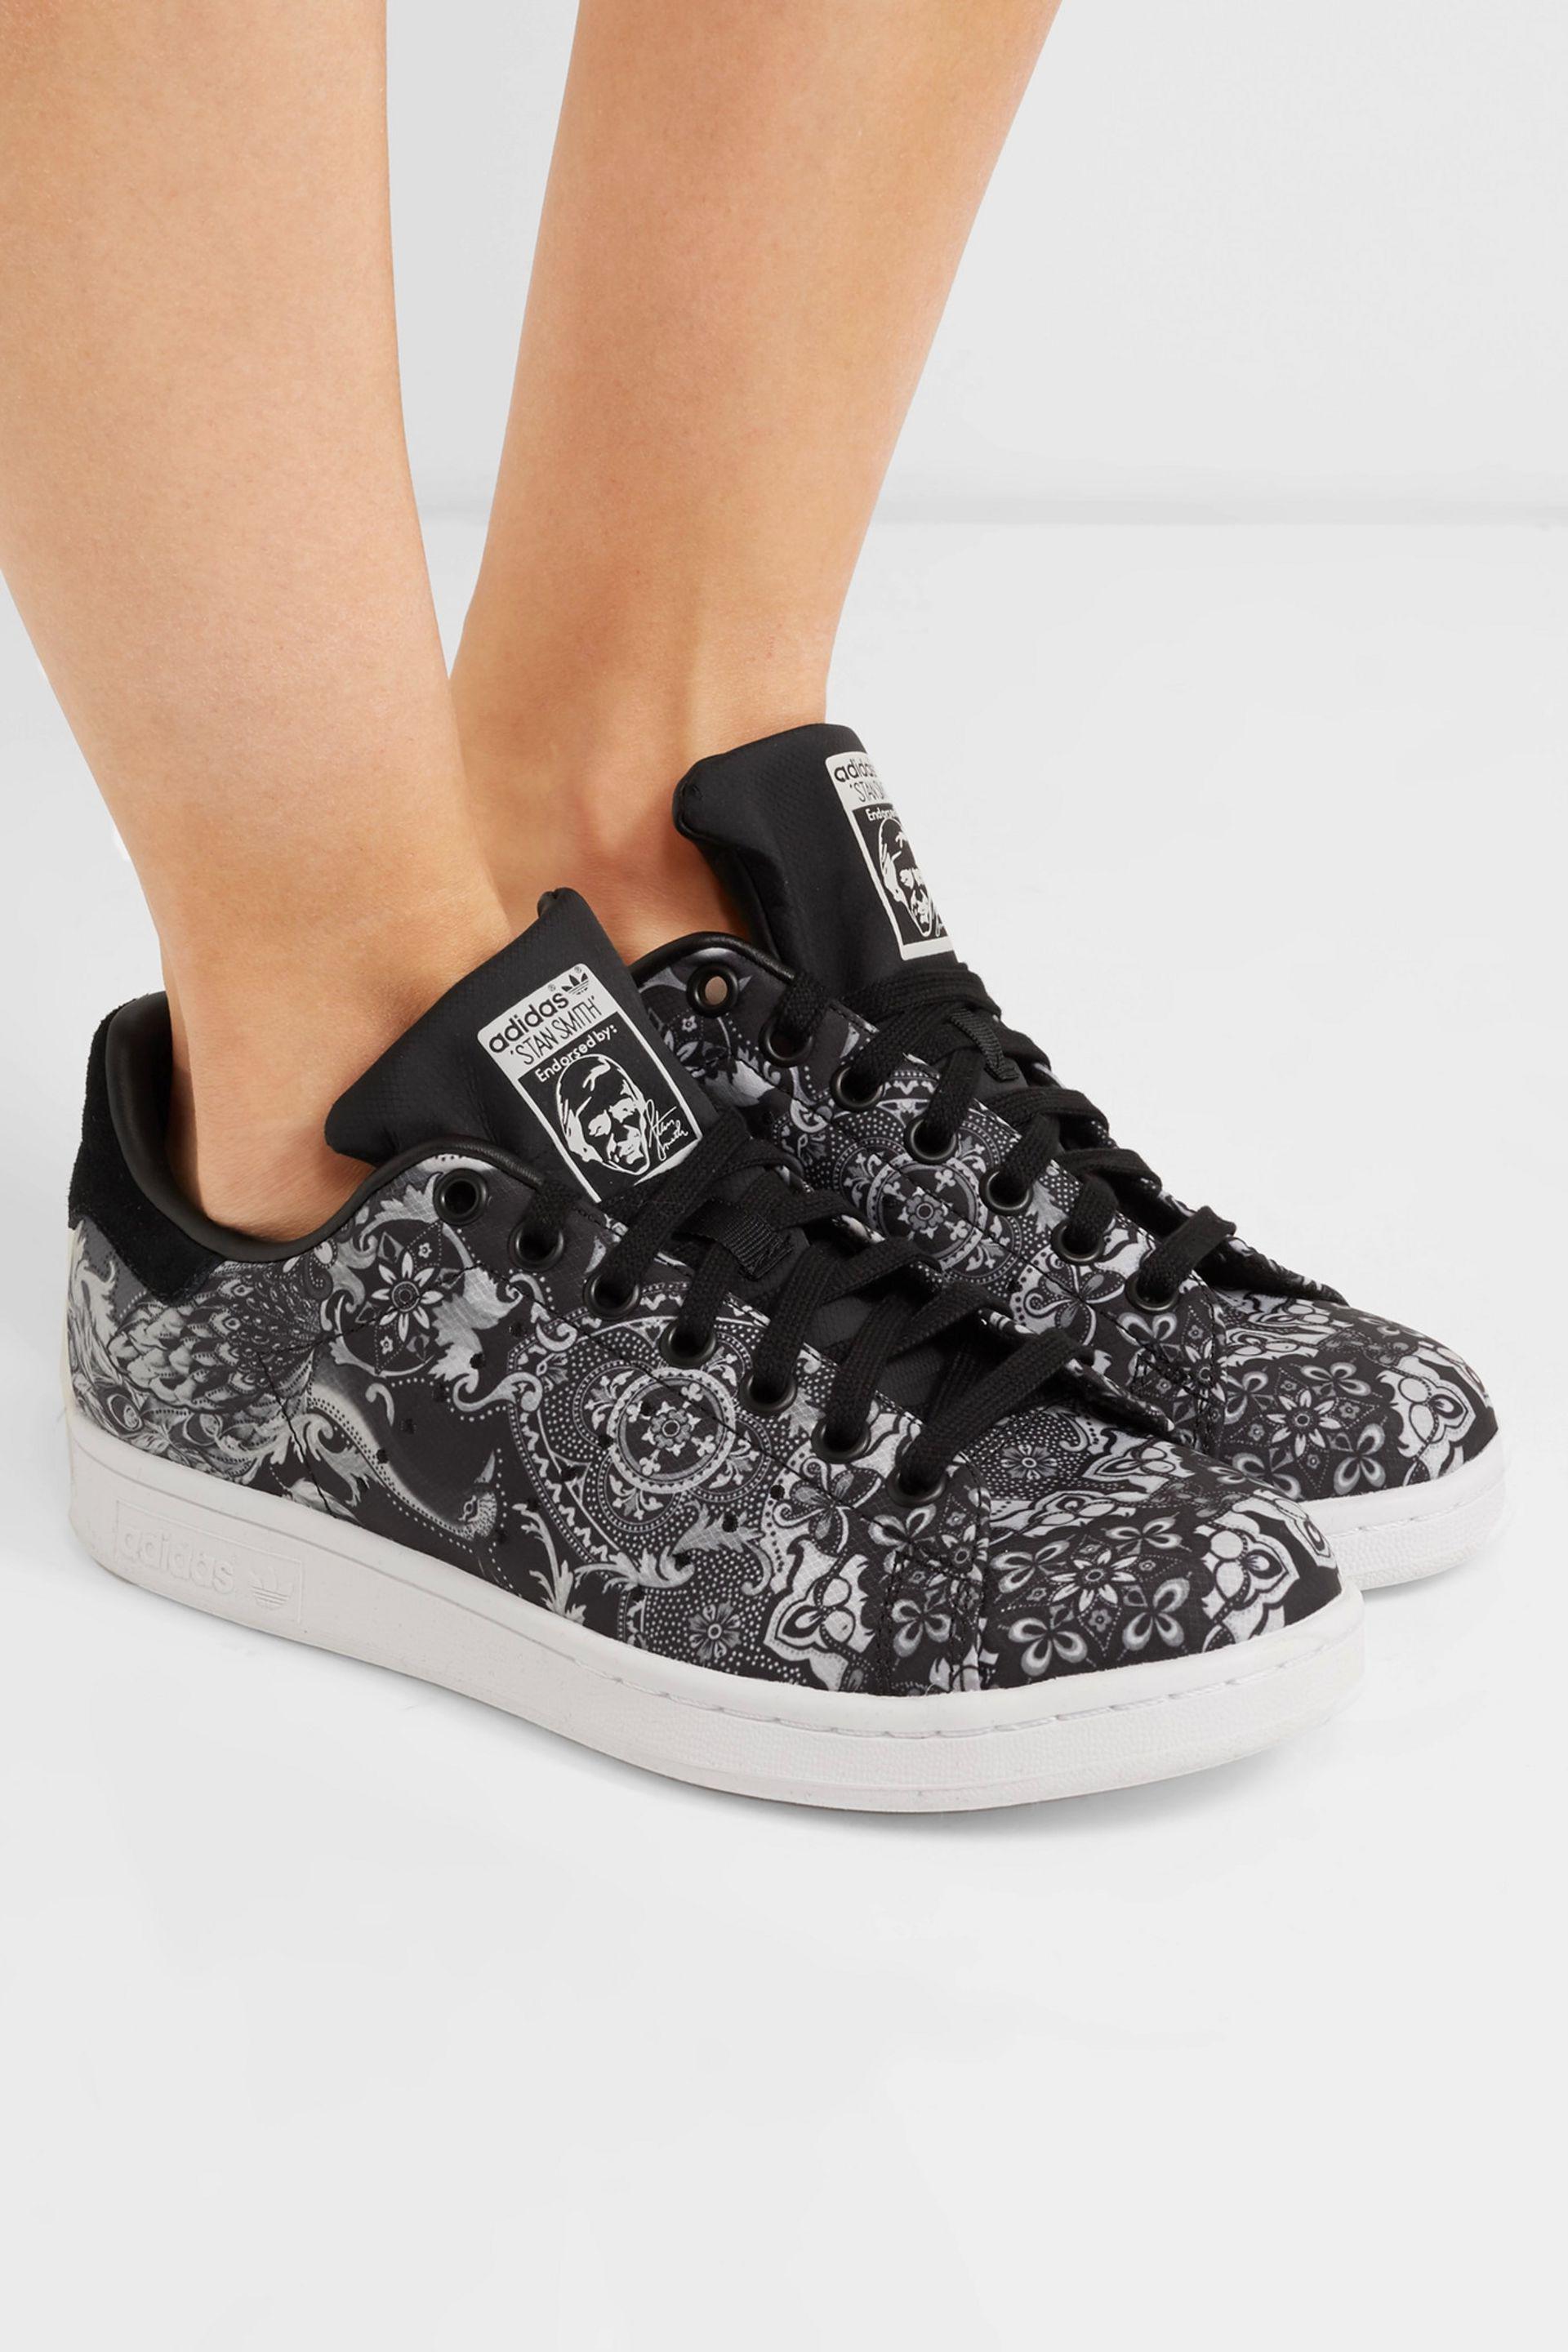 adidas Originals Felt Stan Smith Paisley-print Shell Sneakers in Black -  Lyst